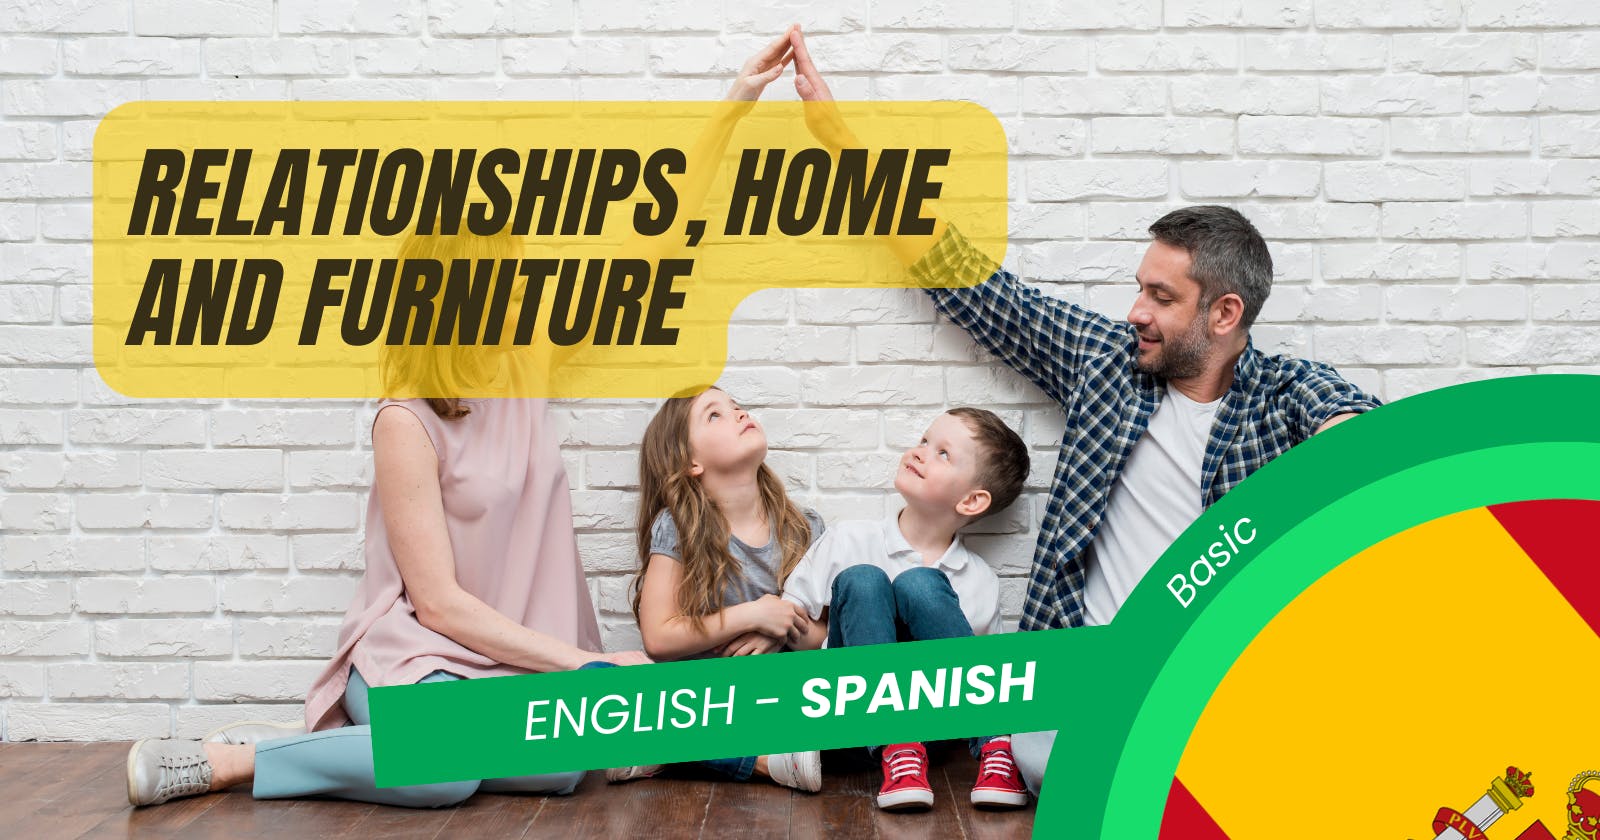 🇪🇸 Relationships, Home, and Furniture: 
Learning Spanish Basic Vocabulary for Personal Life